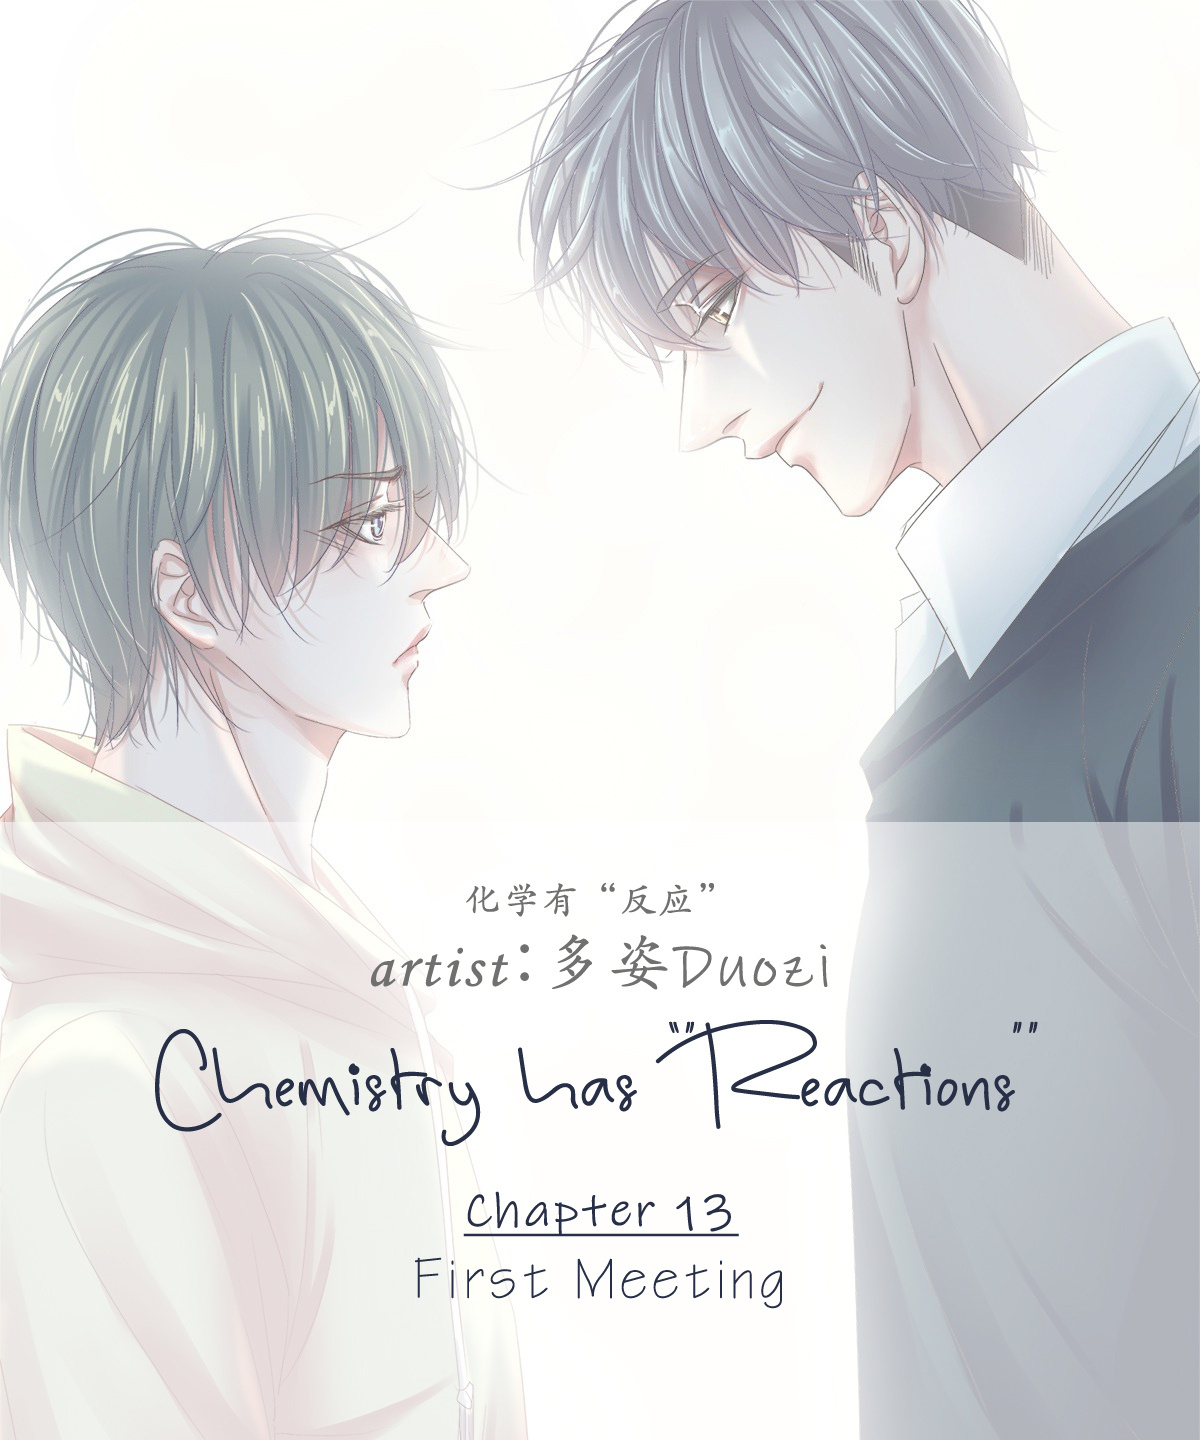 Chemistry Has "reactions" Chapter 13 #1